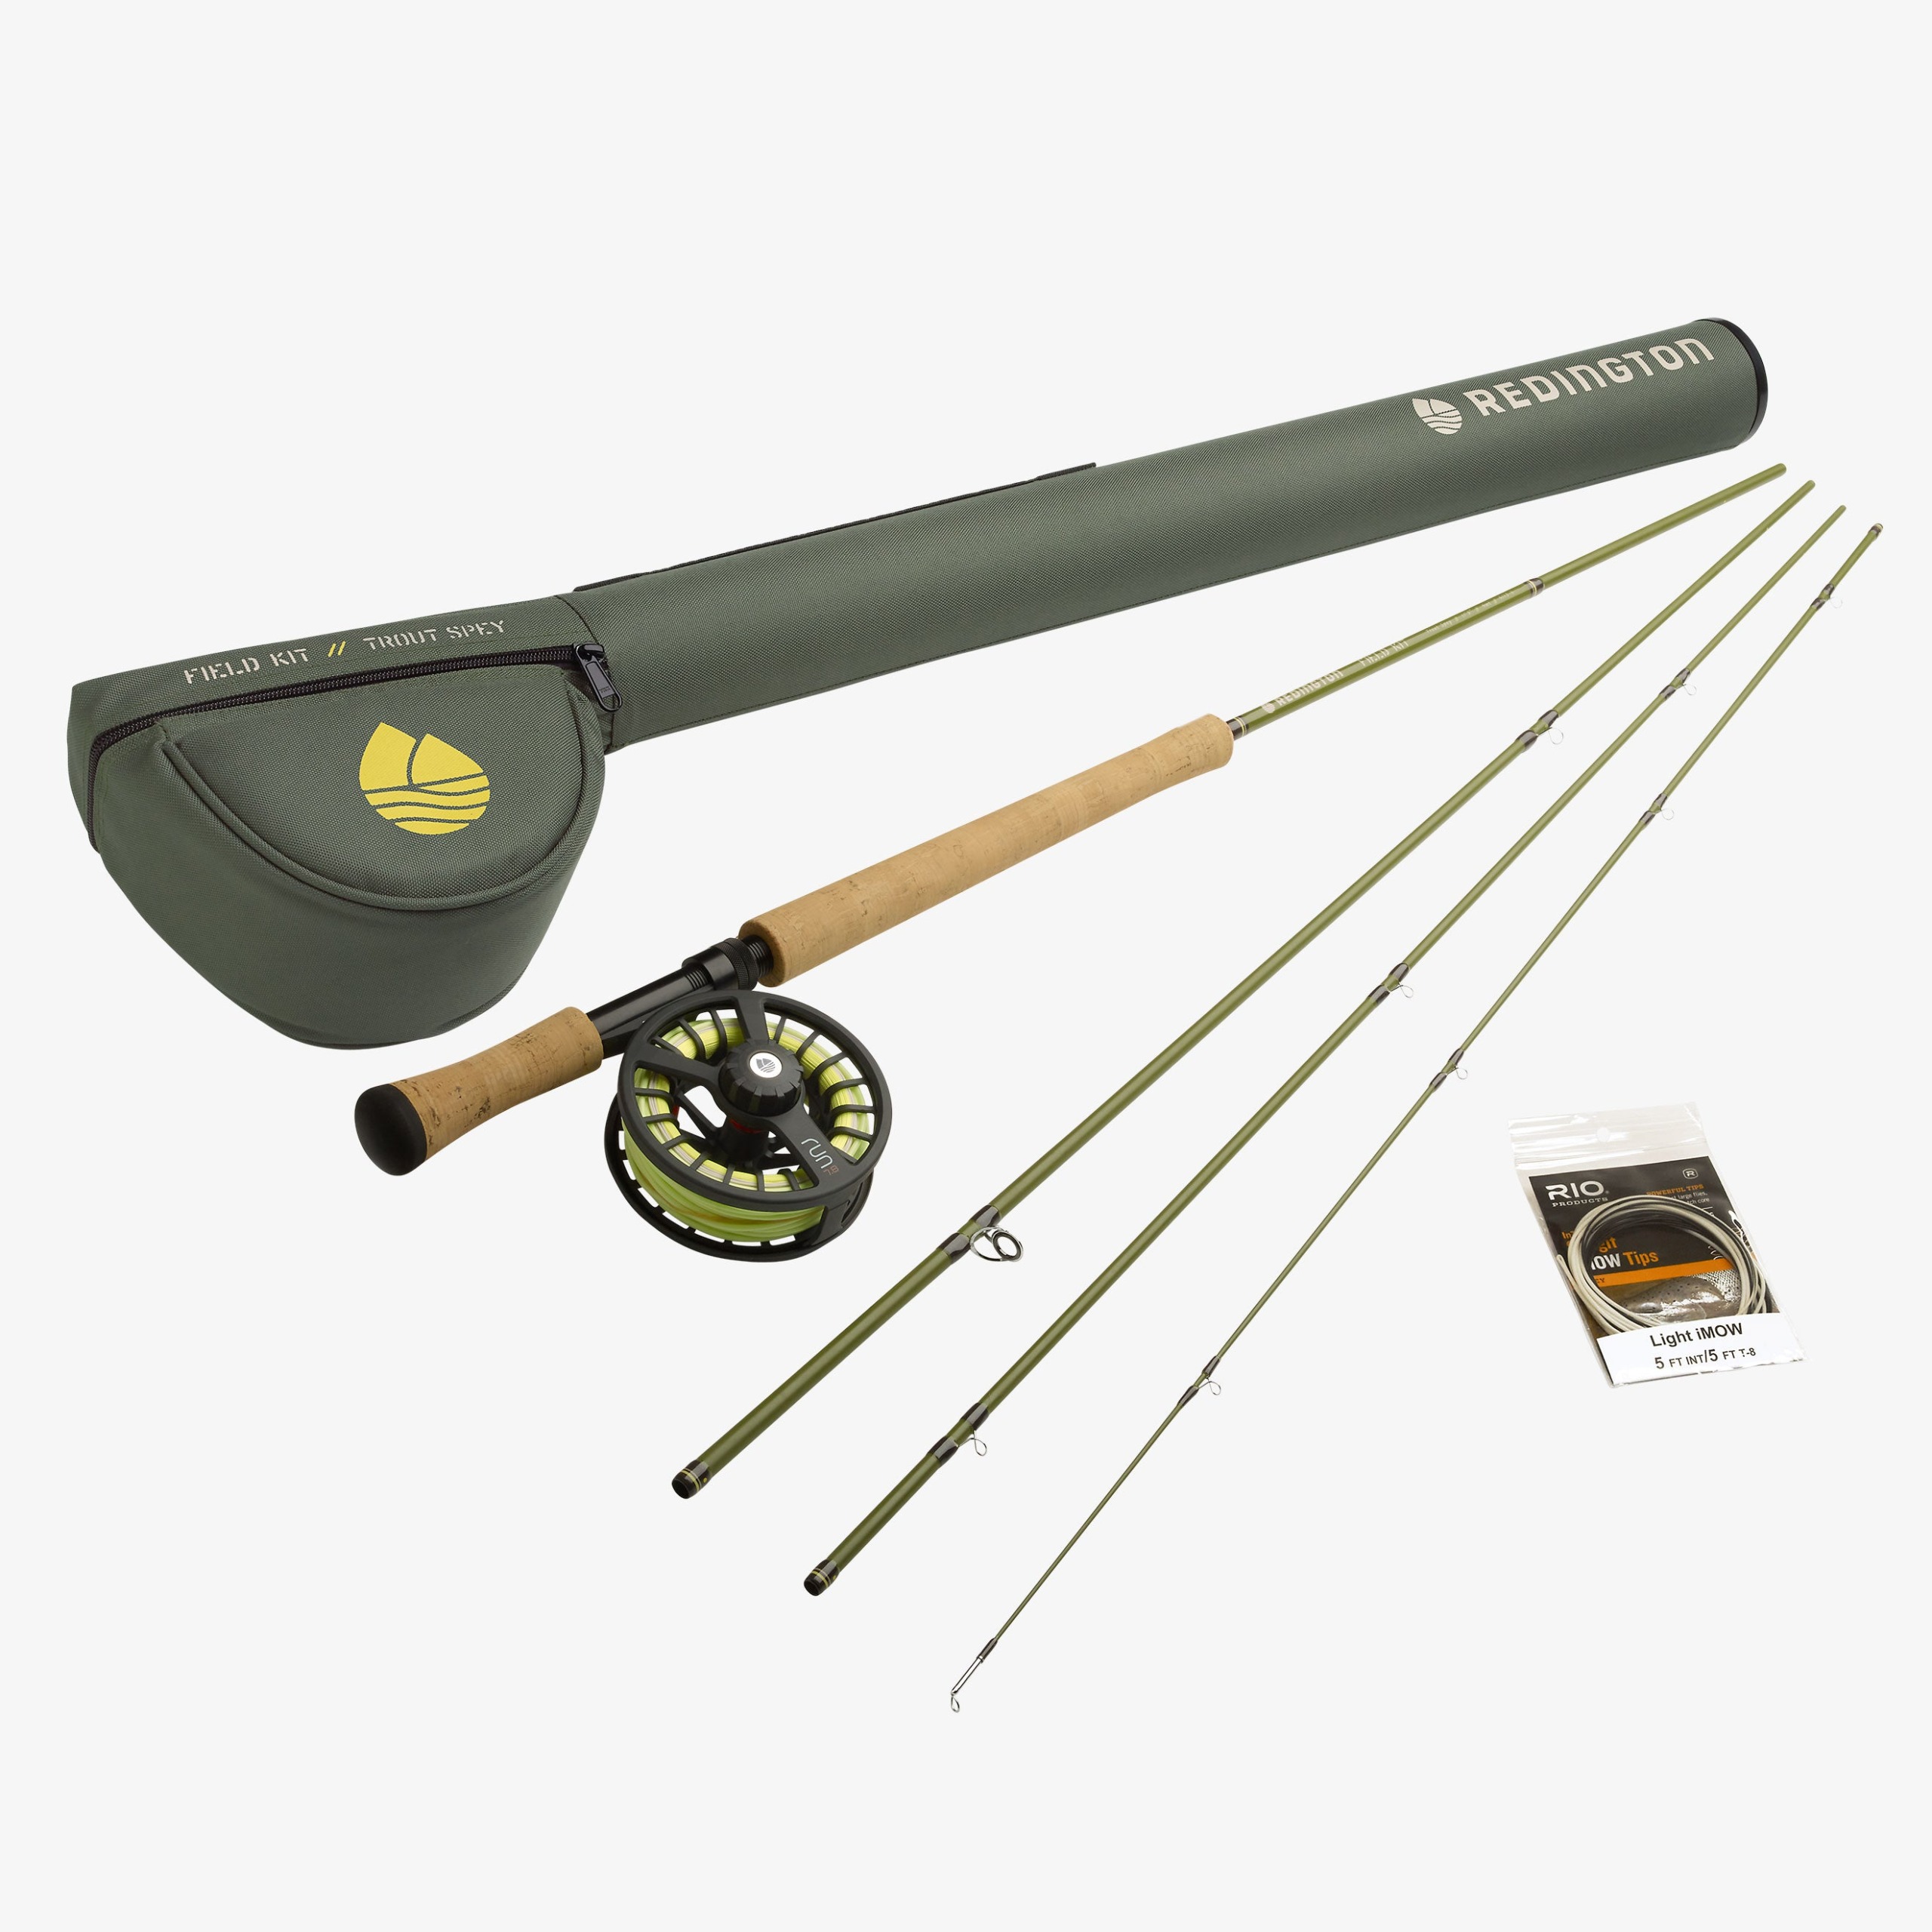 Redington Trout Spey Field Kit – The First Cast – Hook, Line and